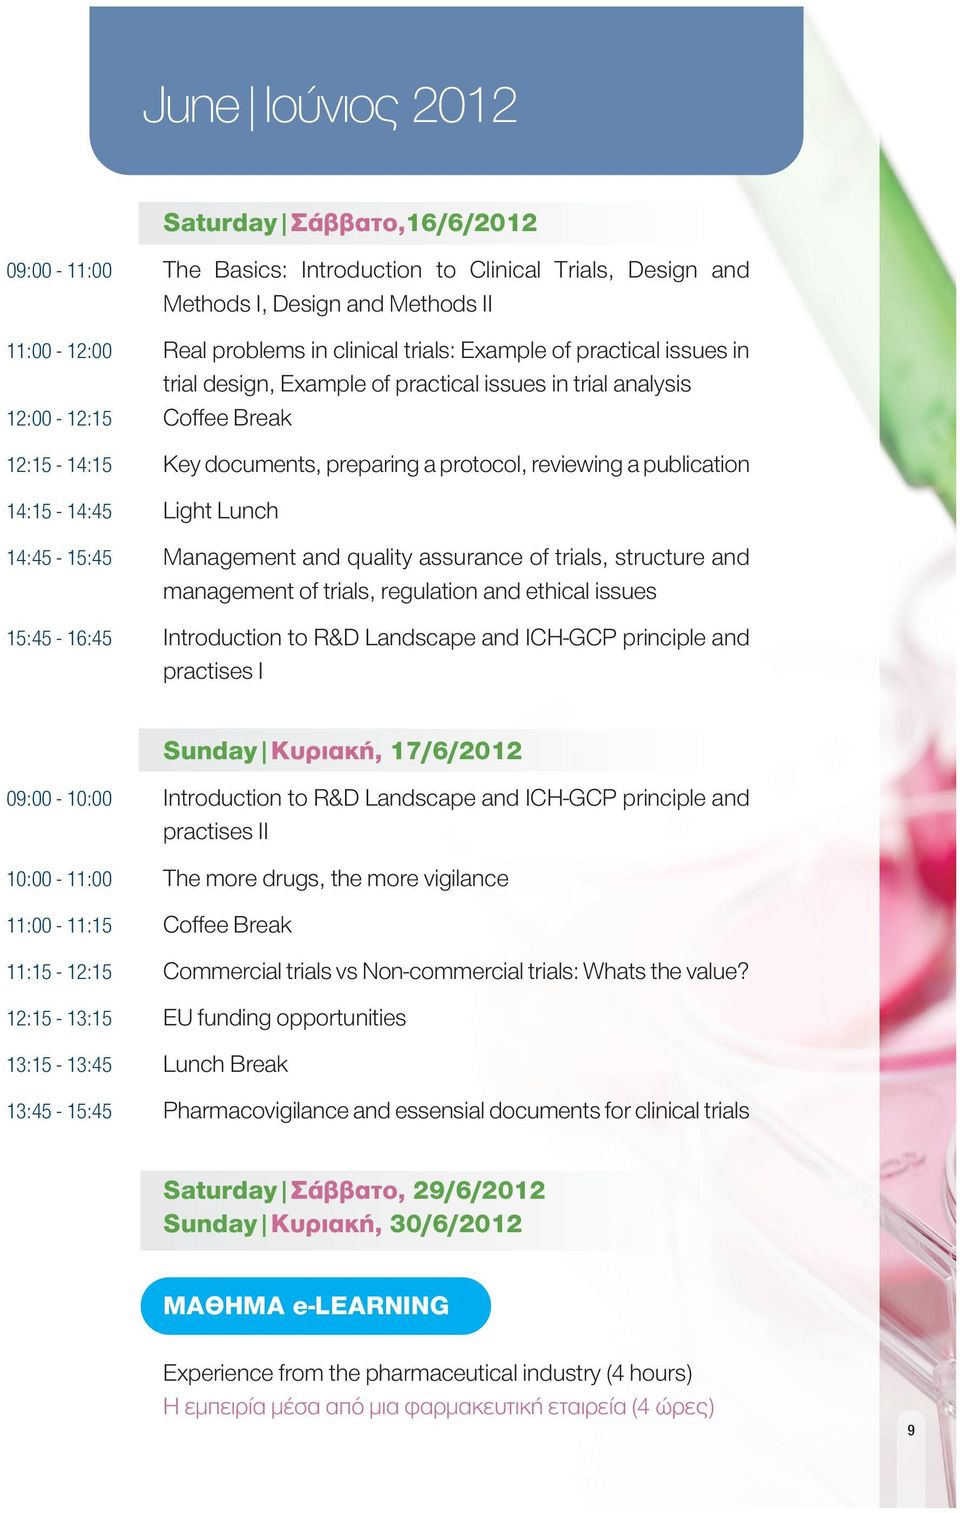 Lunch 14:45-15:45 Management and quality assurance of trials, structure and management of trials, regulation and ethical issues 15:45-16:45 Introduction to R&D Landscape and ICH-GCP principle and